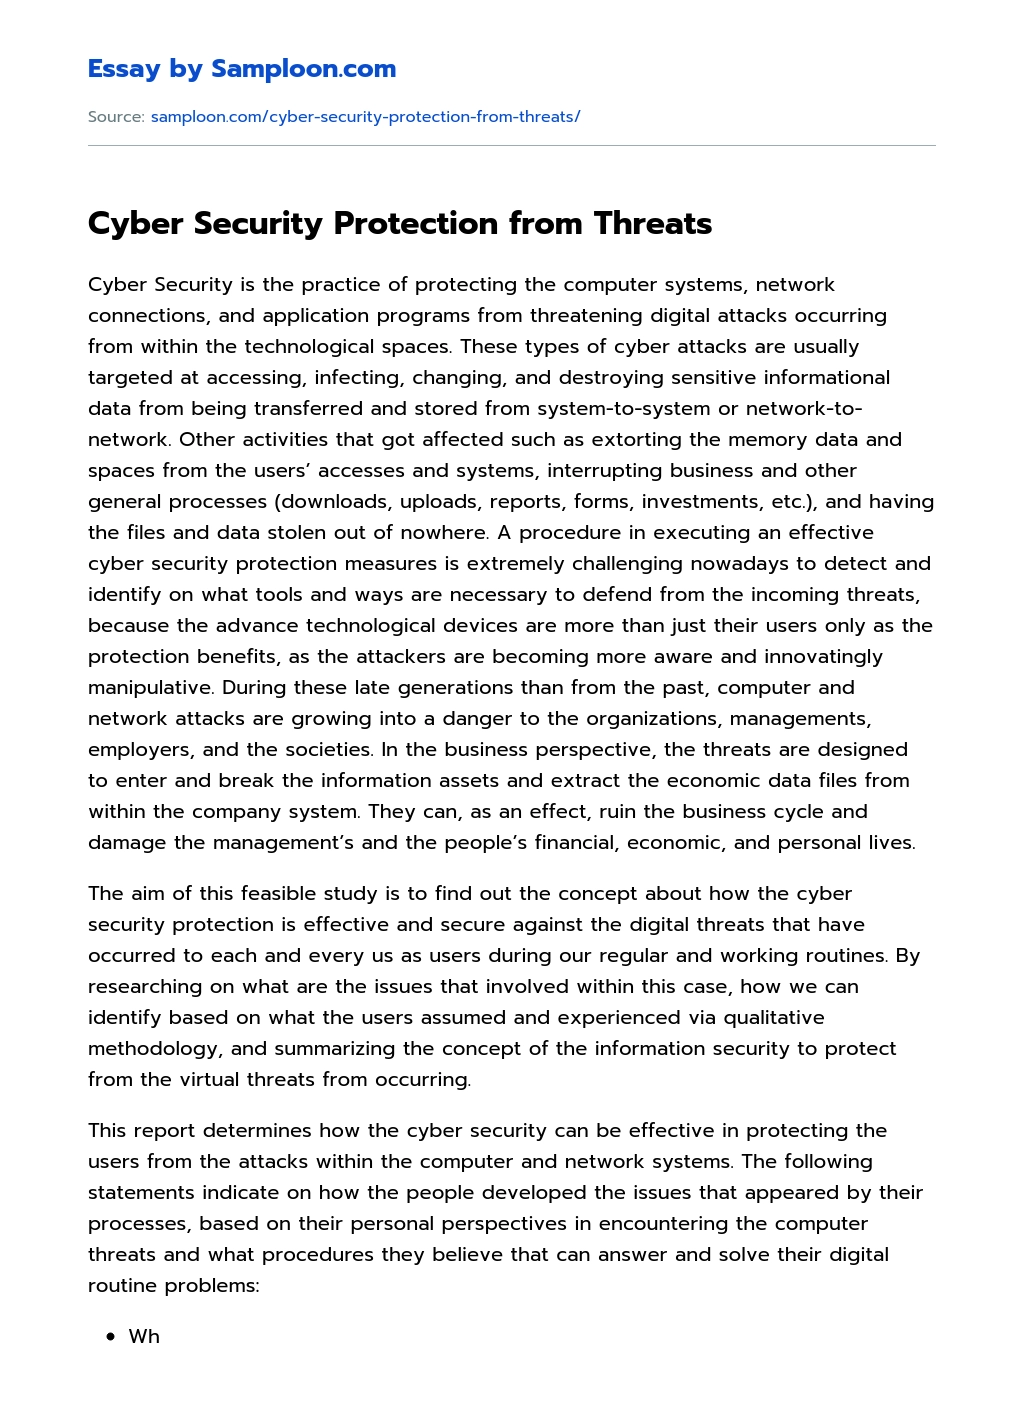 Cyber Security Protection from Threats Personal Essay essay